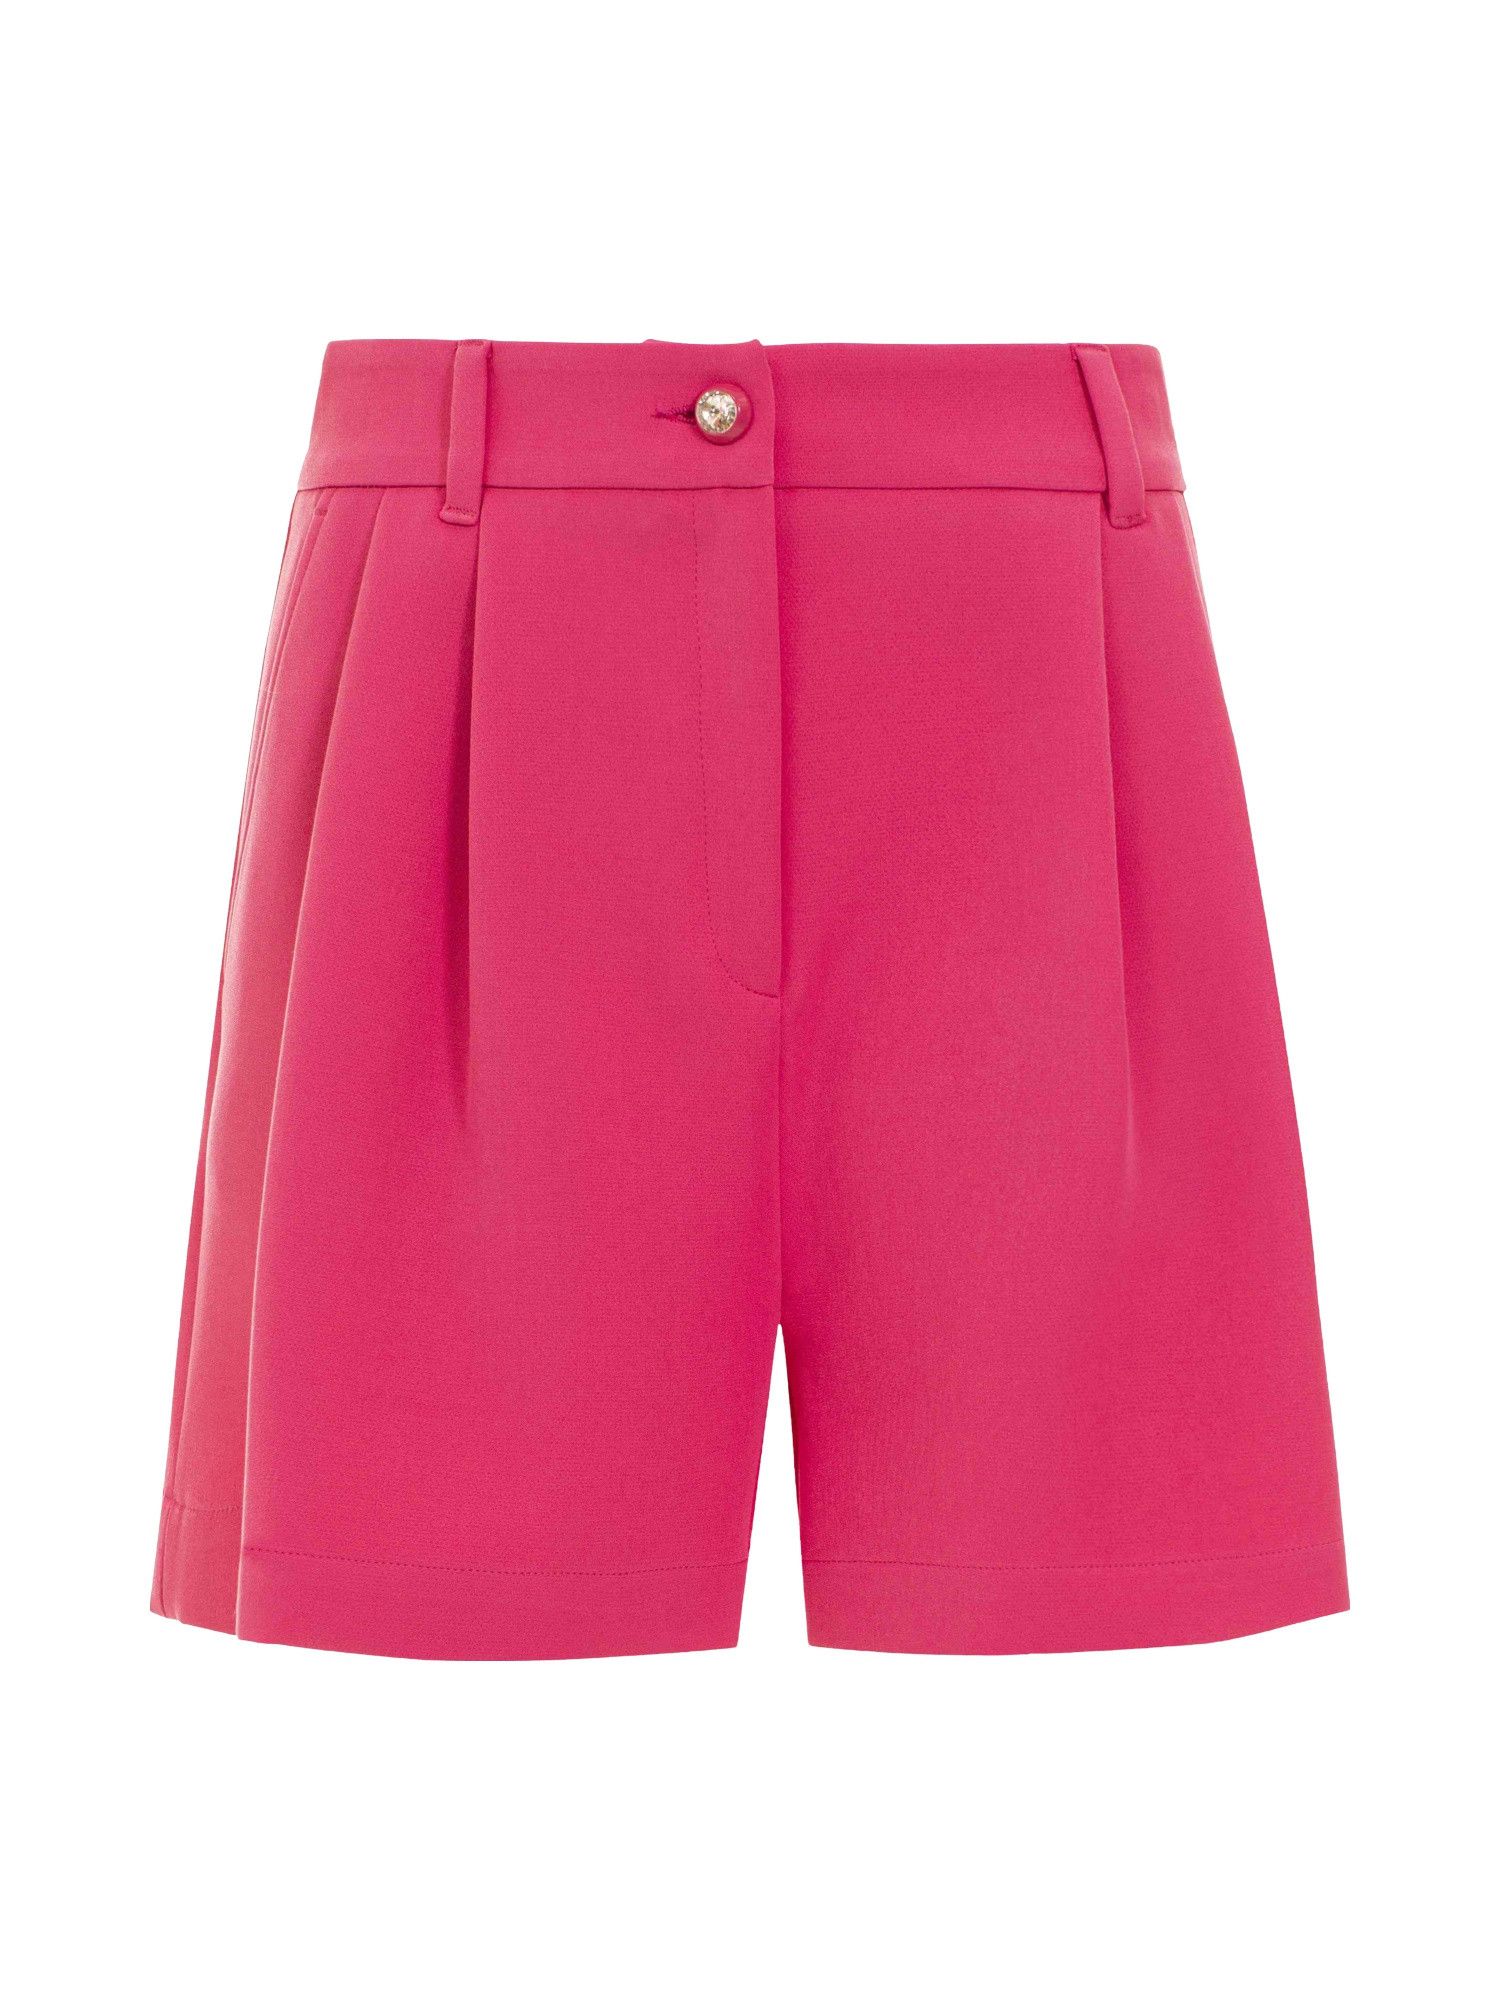 Chiara Ferragni - Bermuda shorts with pences and jewel button, Pink Fuchsia, large image number 0